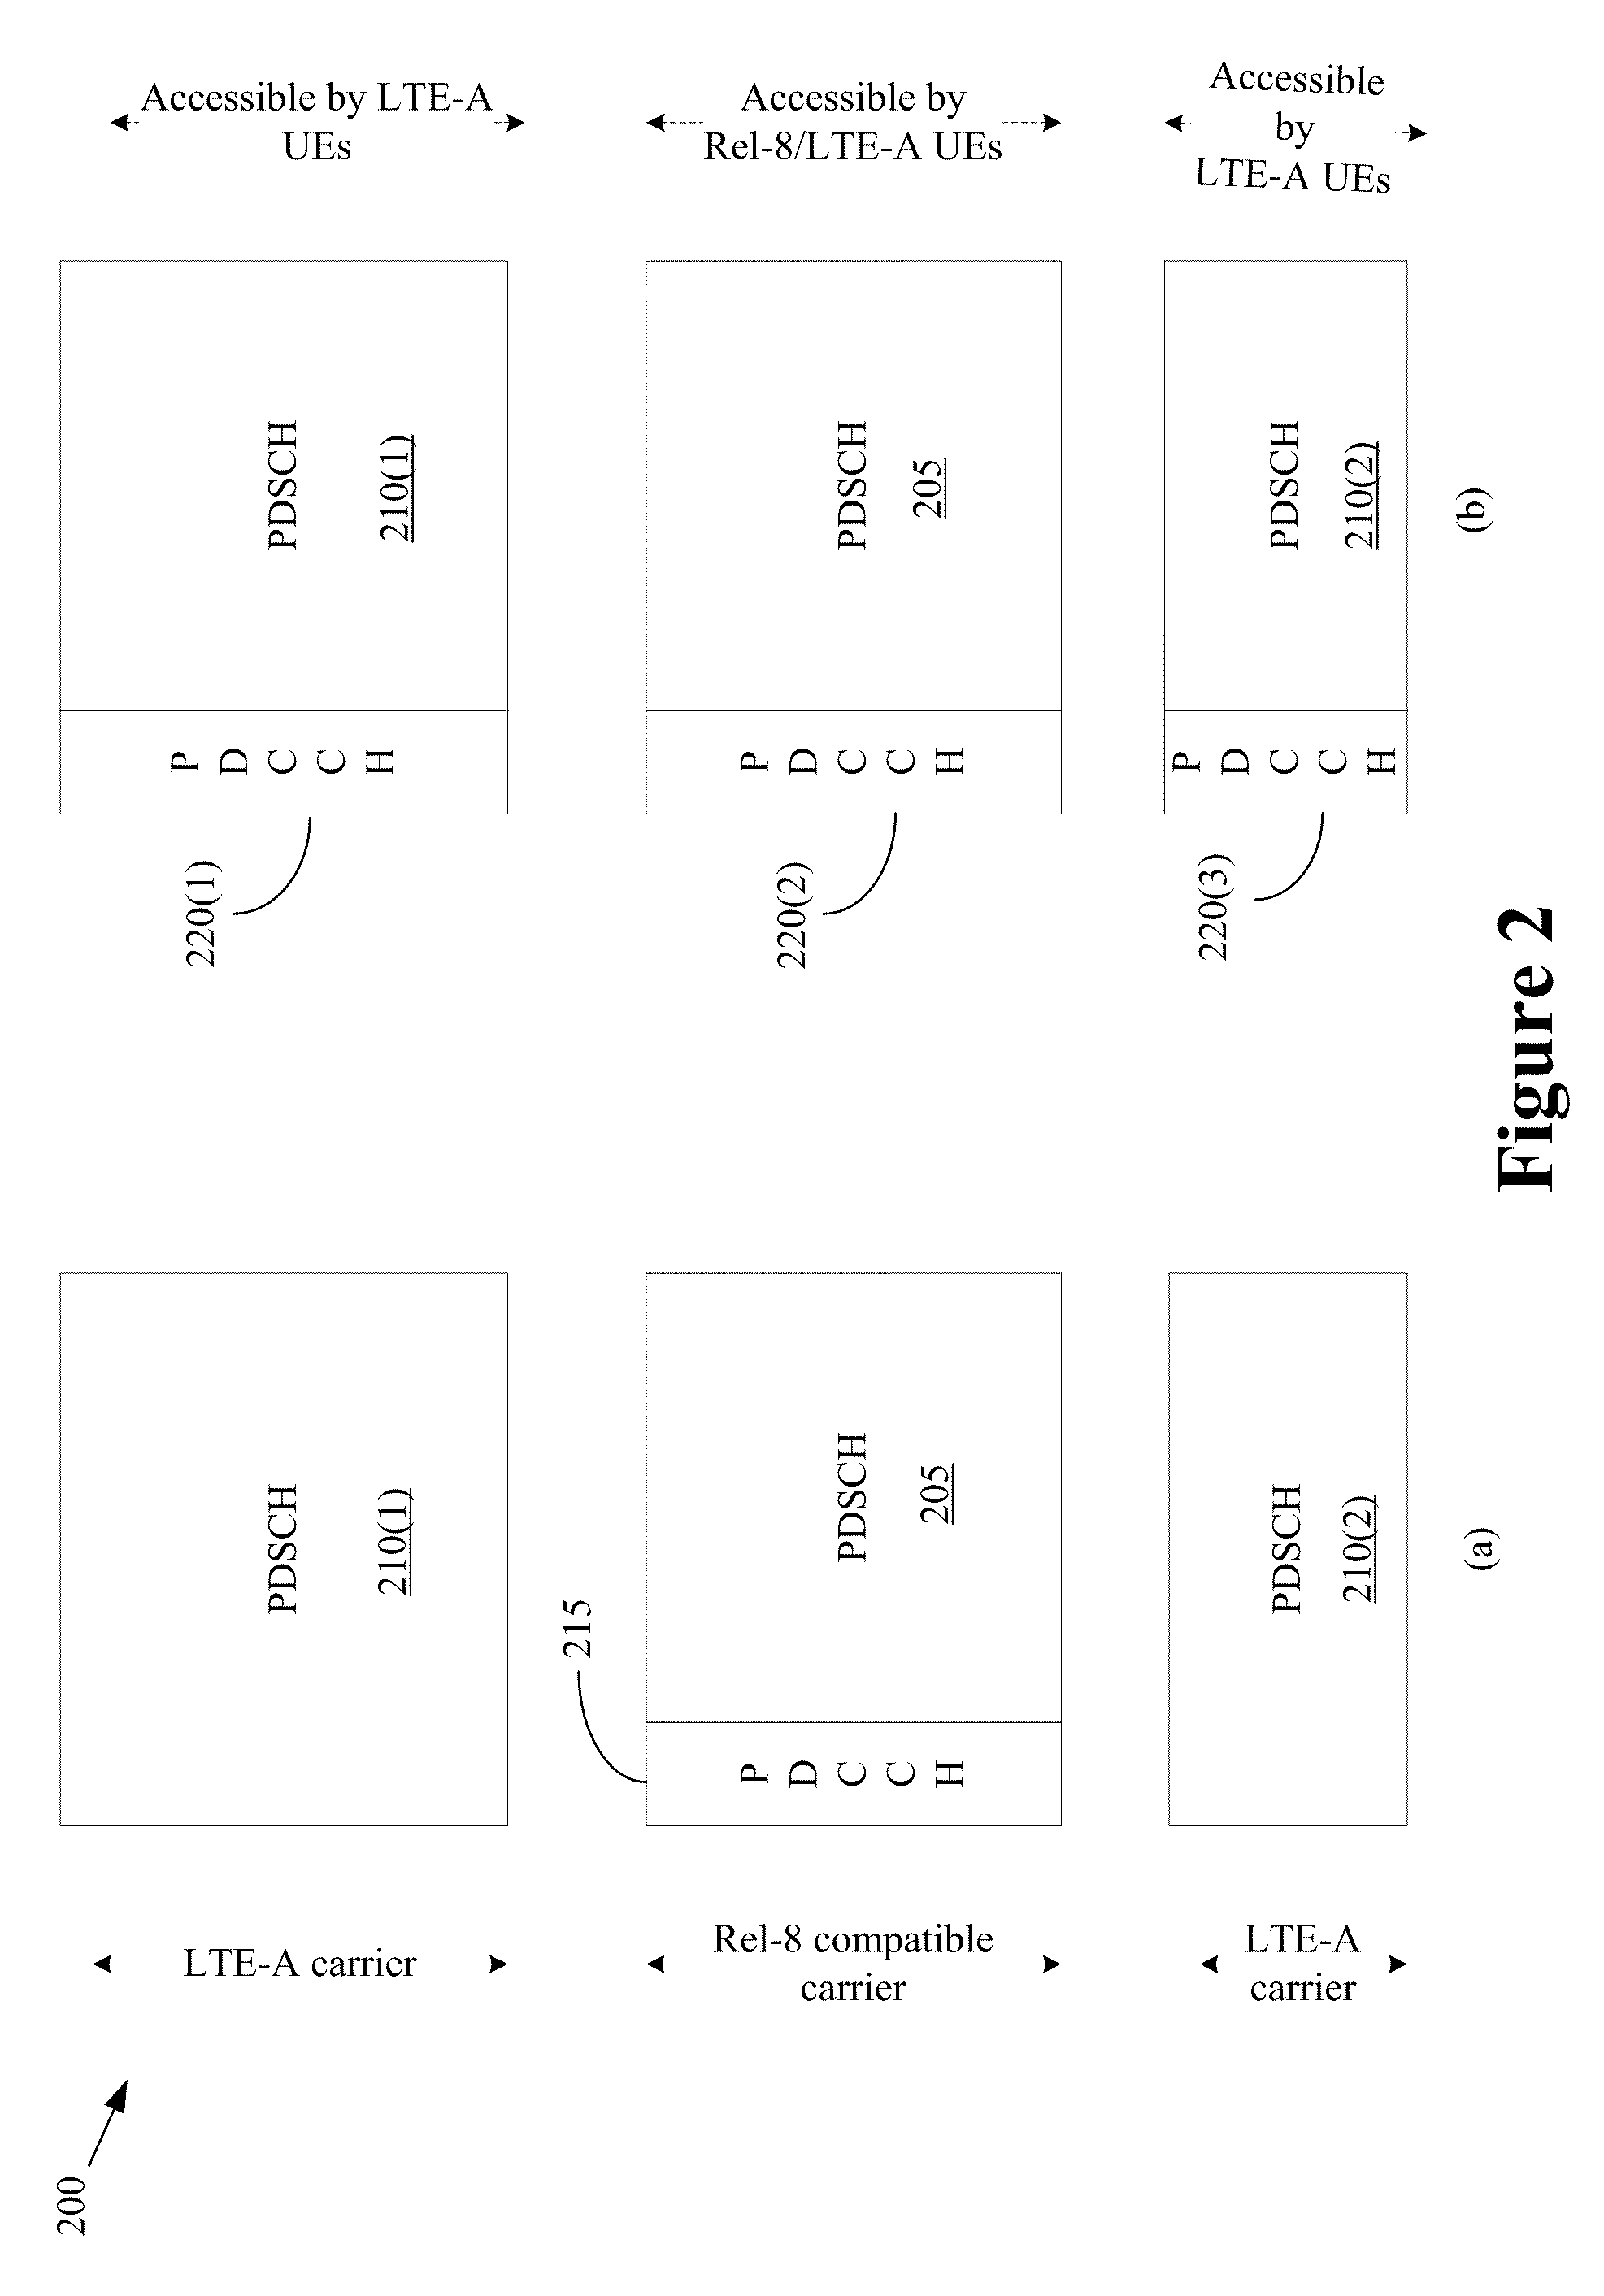 Method of bandwidth extension by aggregating backwards compatible and non-backwards compatible carriers